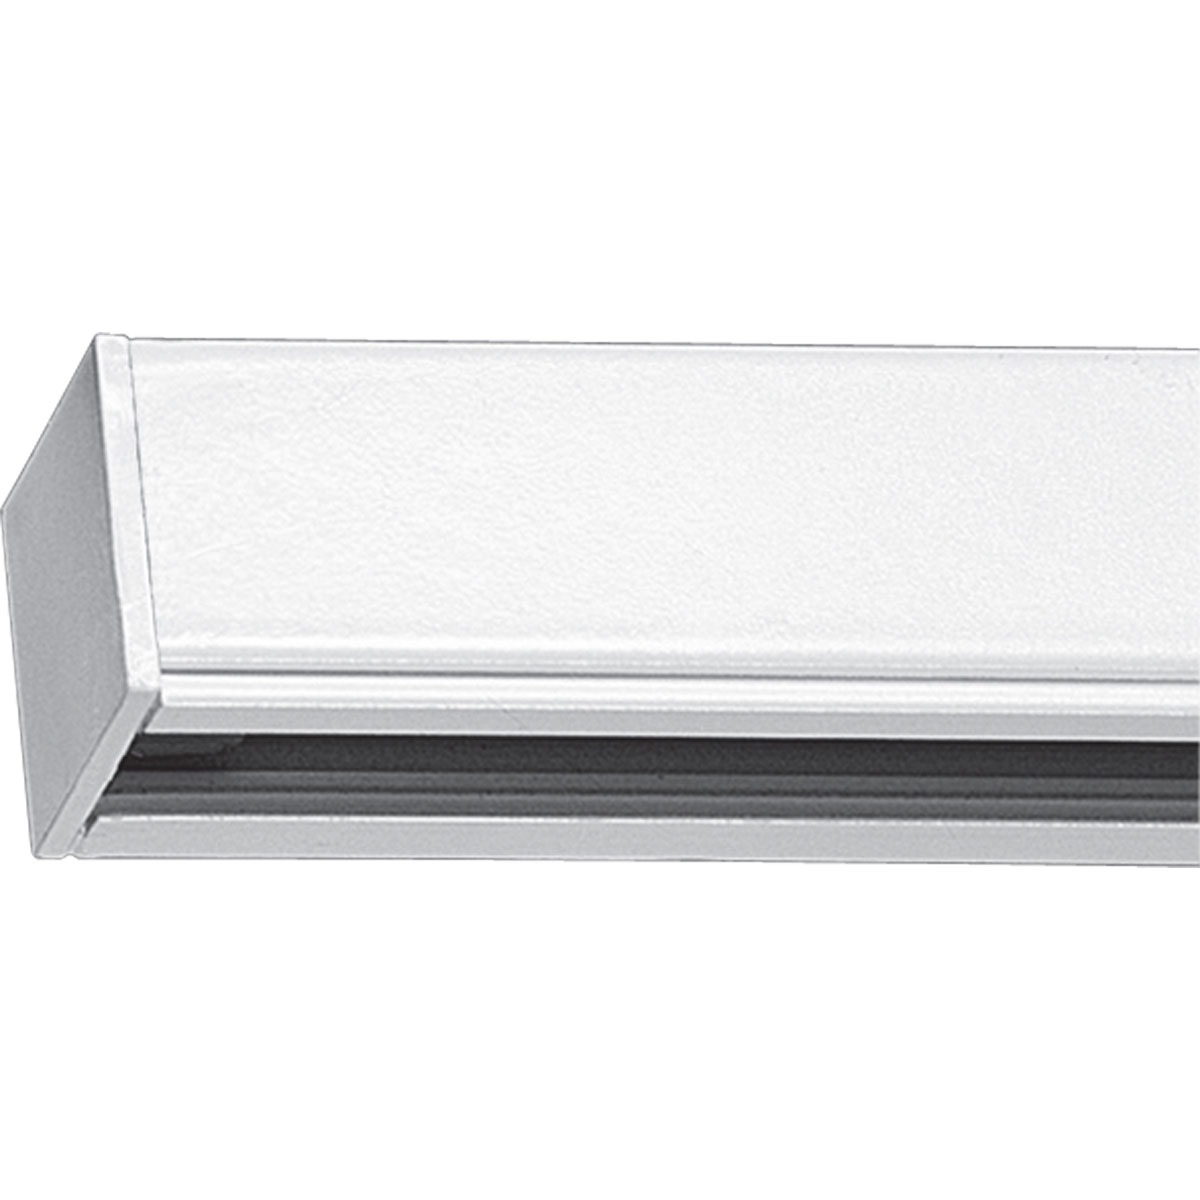 Alpha Trak sections are extruded aluminum with positive contact, can be cut. Designed for 120-volt supply with 20 amp capacity. All 4' track sections include one dead end and mounting hardware. White finish.